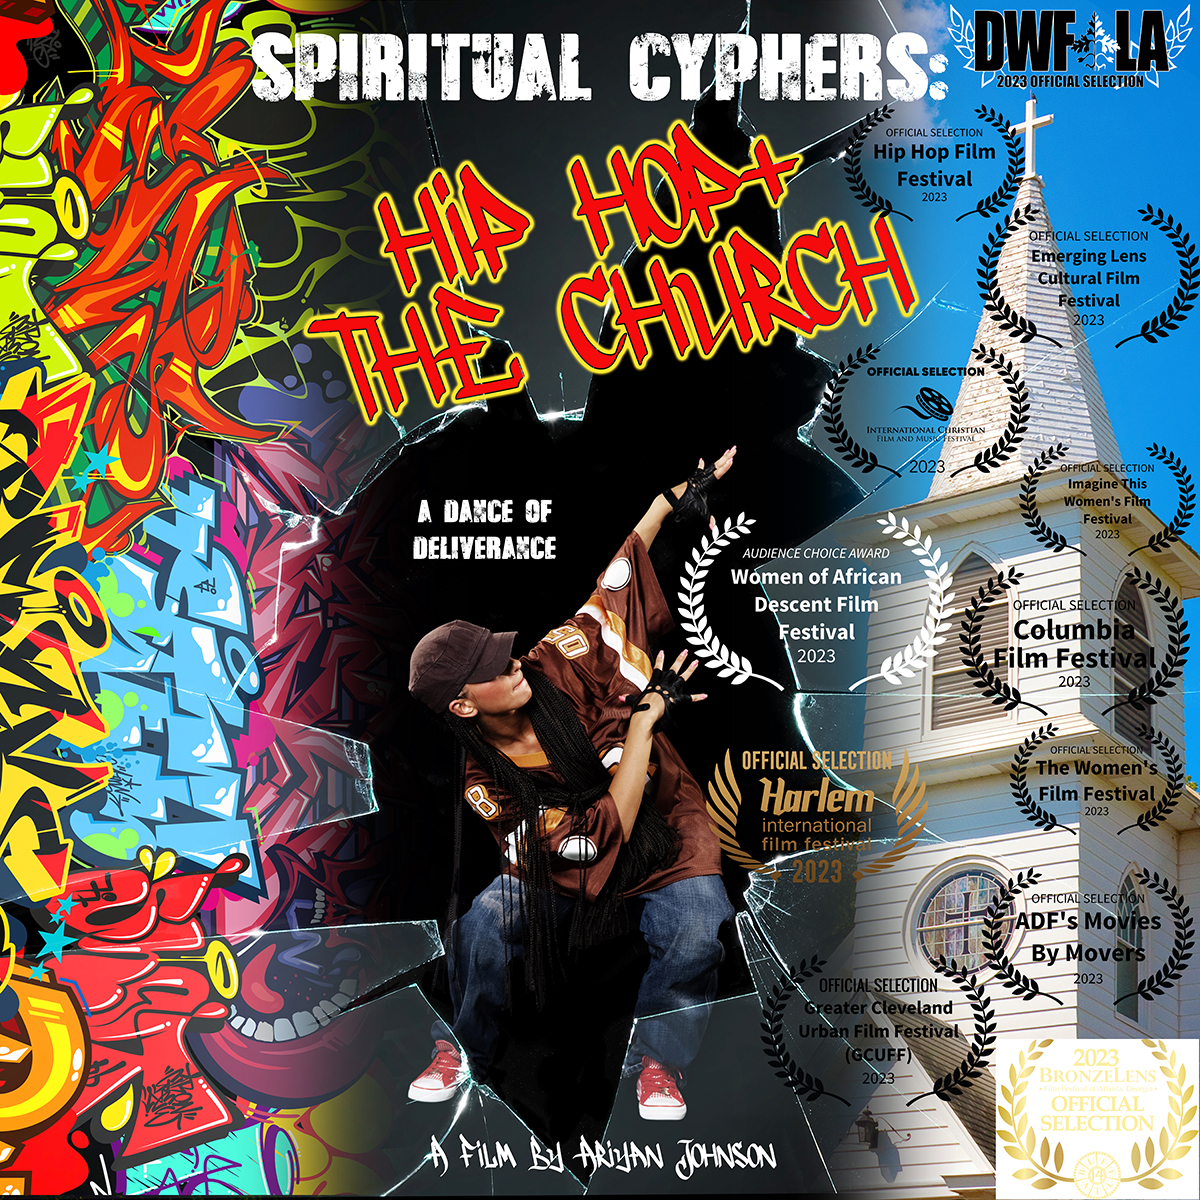 UPDATED_8-16-23_ONE SHEET_spiritual-cyphers-image-square-fullsize copy